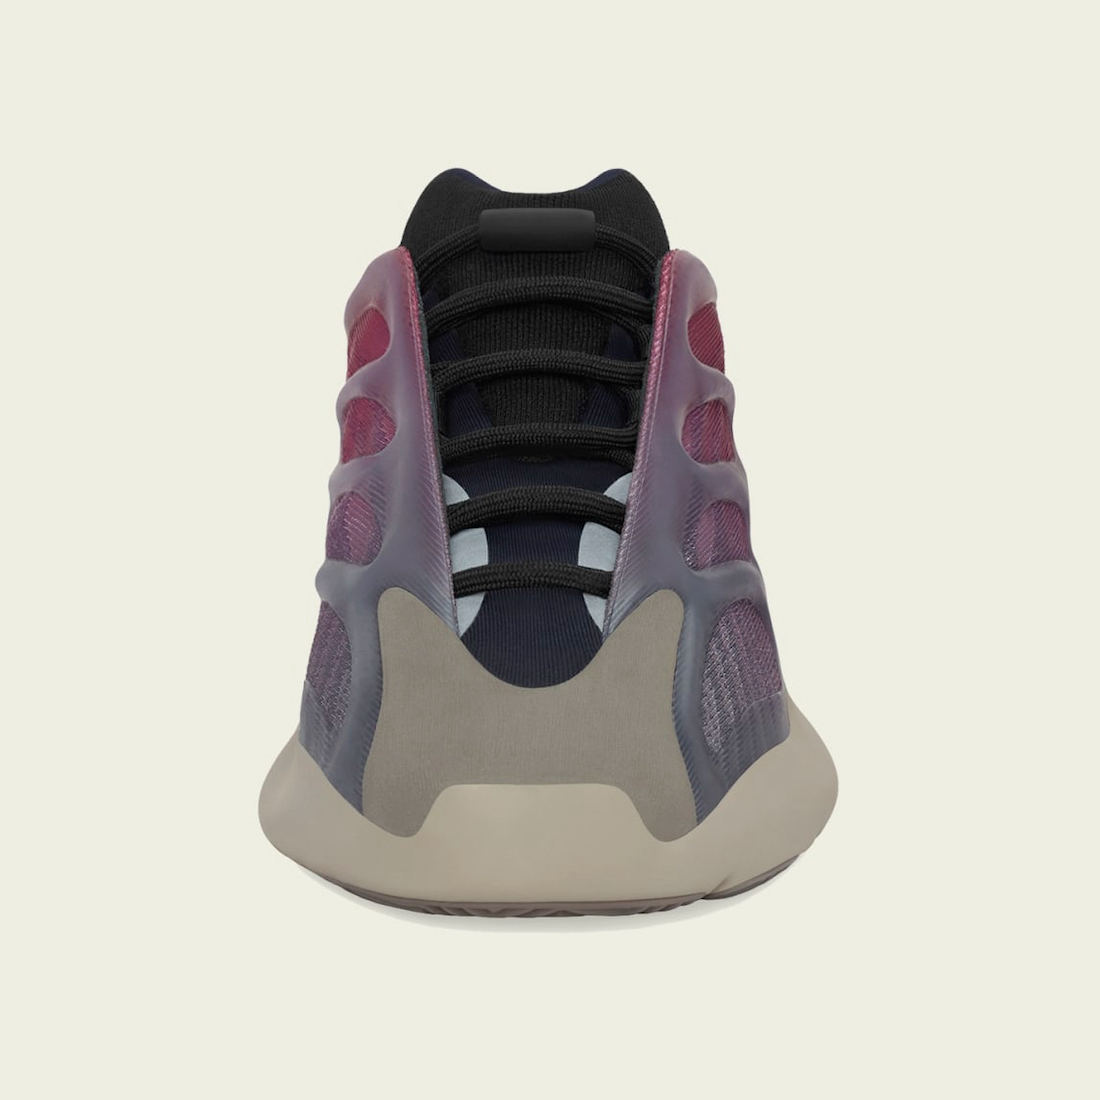 adidas-Yeezy-700-V3-Fade-Carbon-GW1814-Release-Date-Price-2